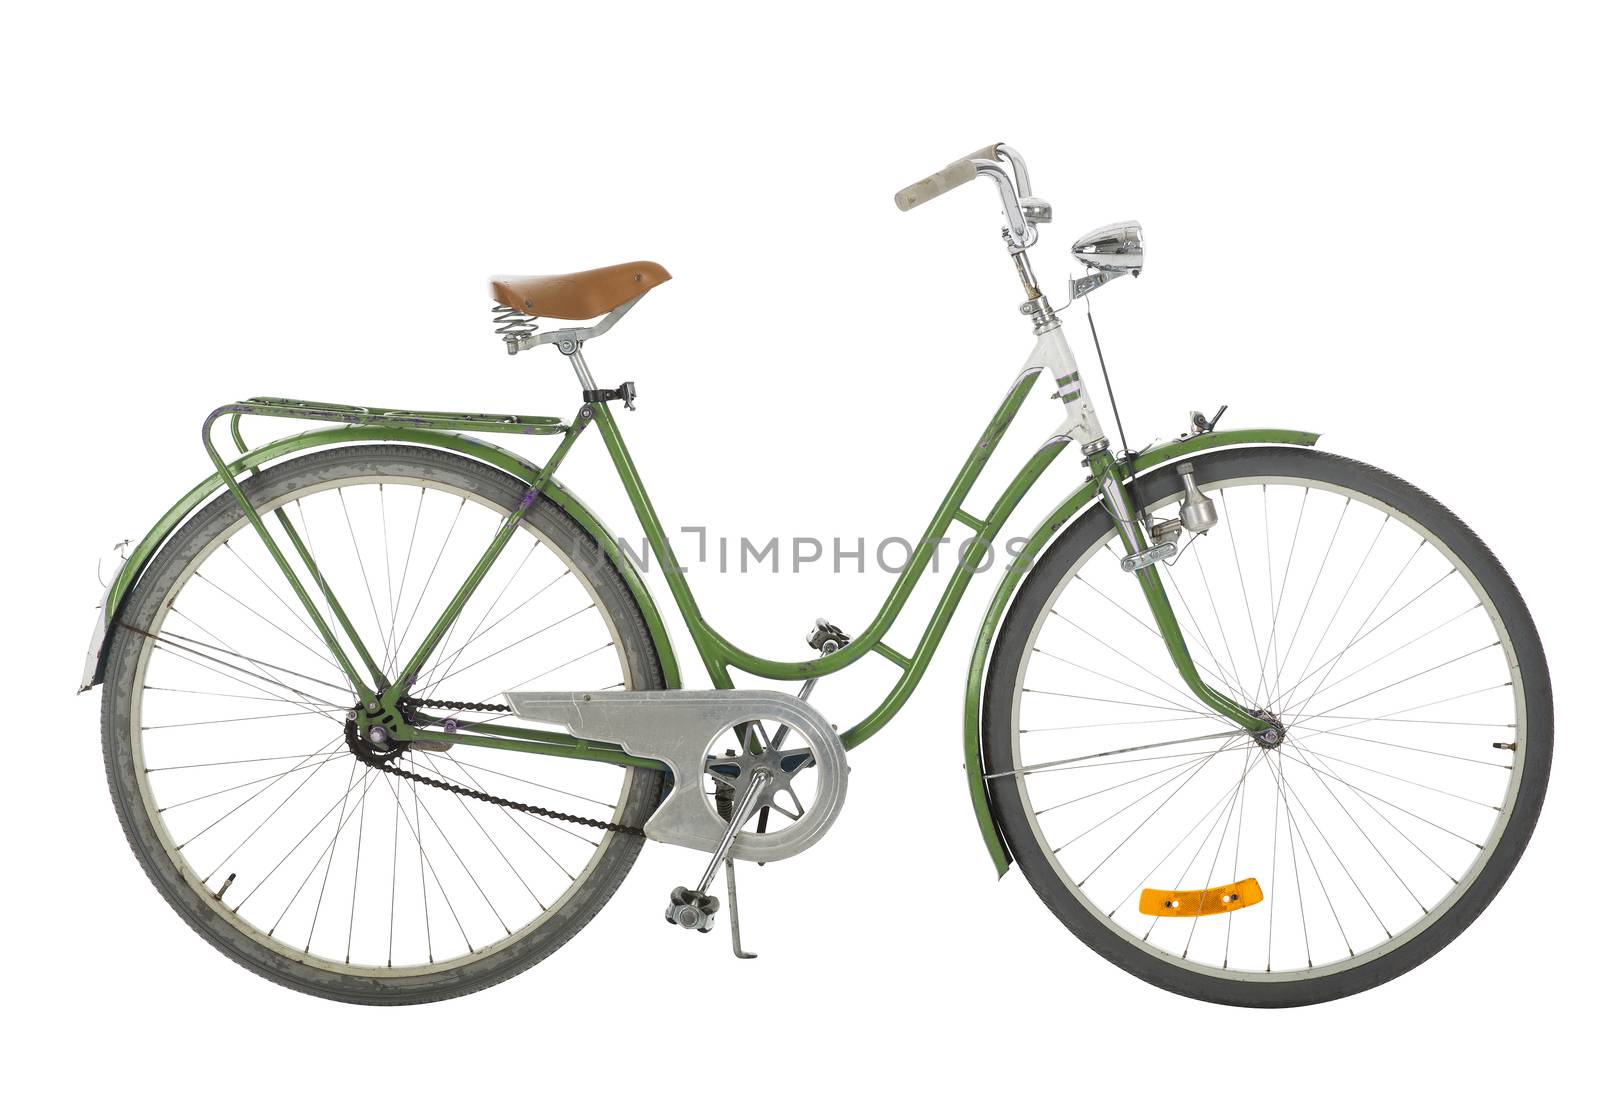 Green Old fashioned bicycle by gemenacom